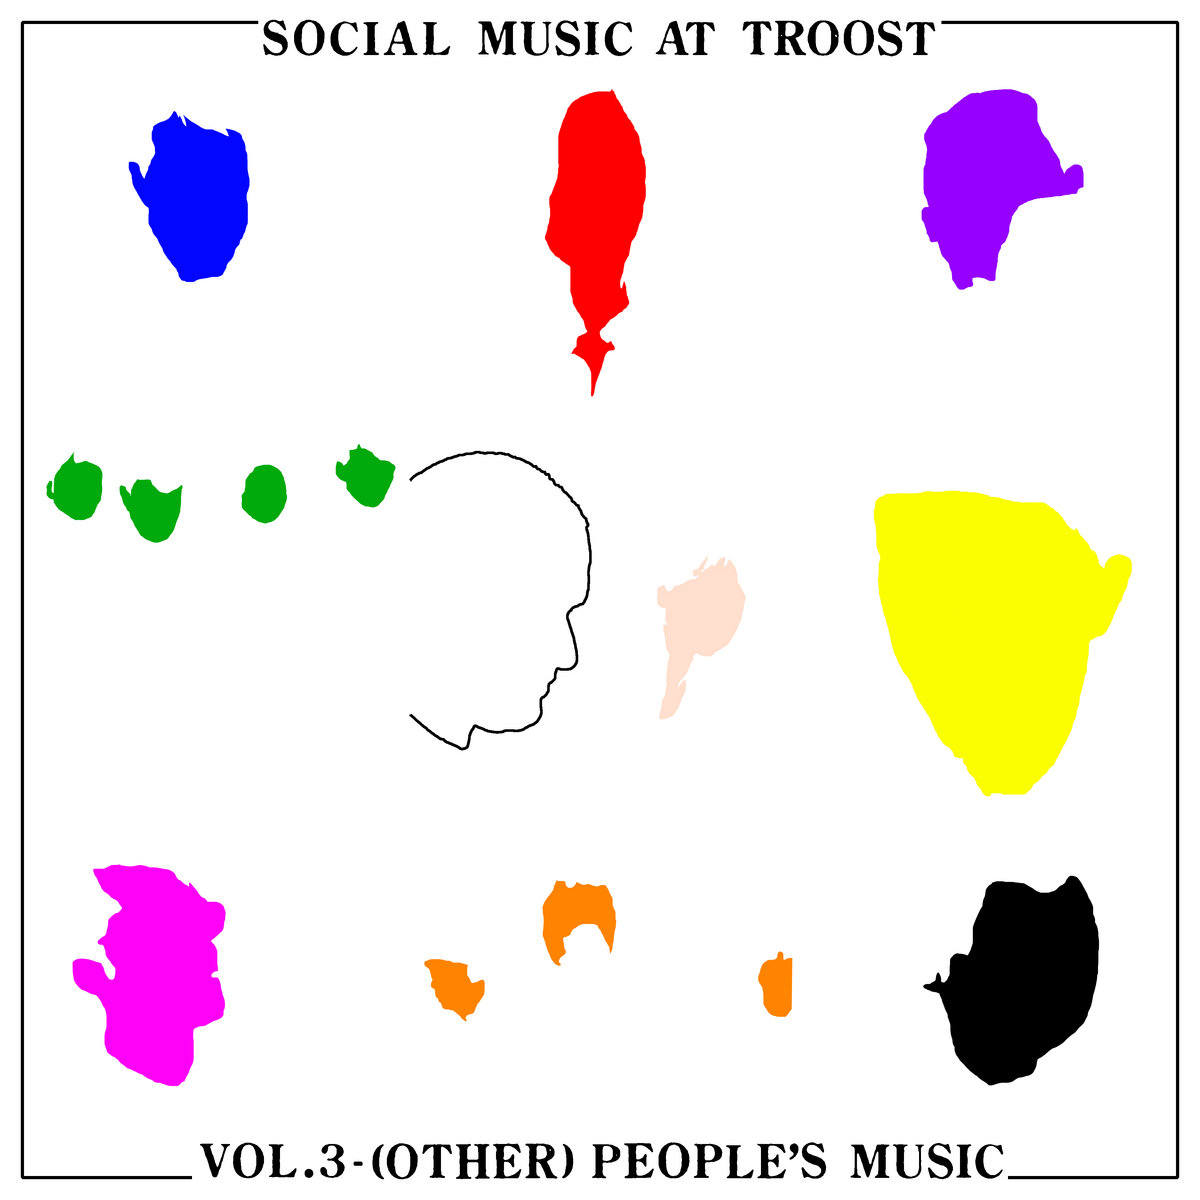 75 Dollar Bill featuring Sue Garner, Cheryl Kingan & Chris Nelson Social Music at Troost Vol. 3: (Other) People's Music